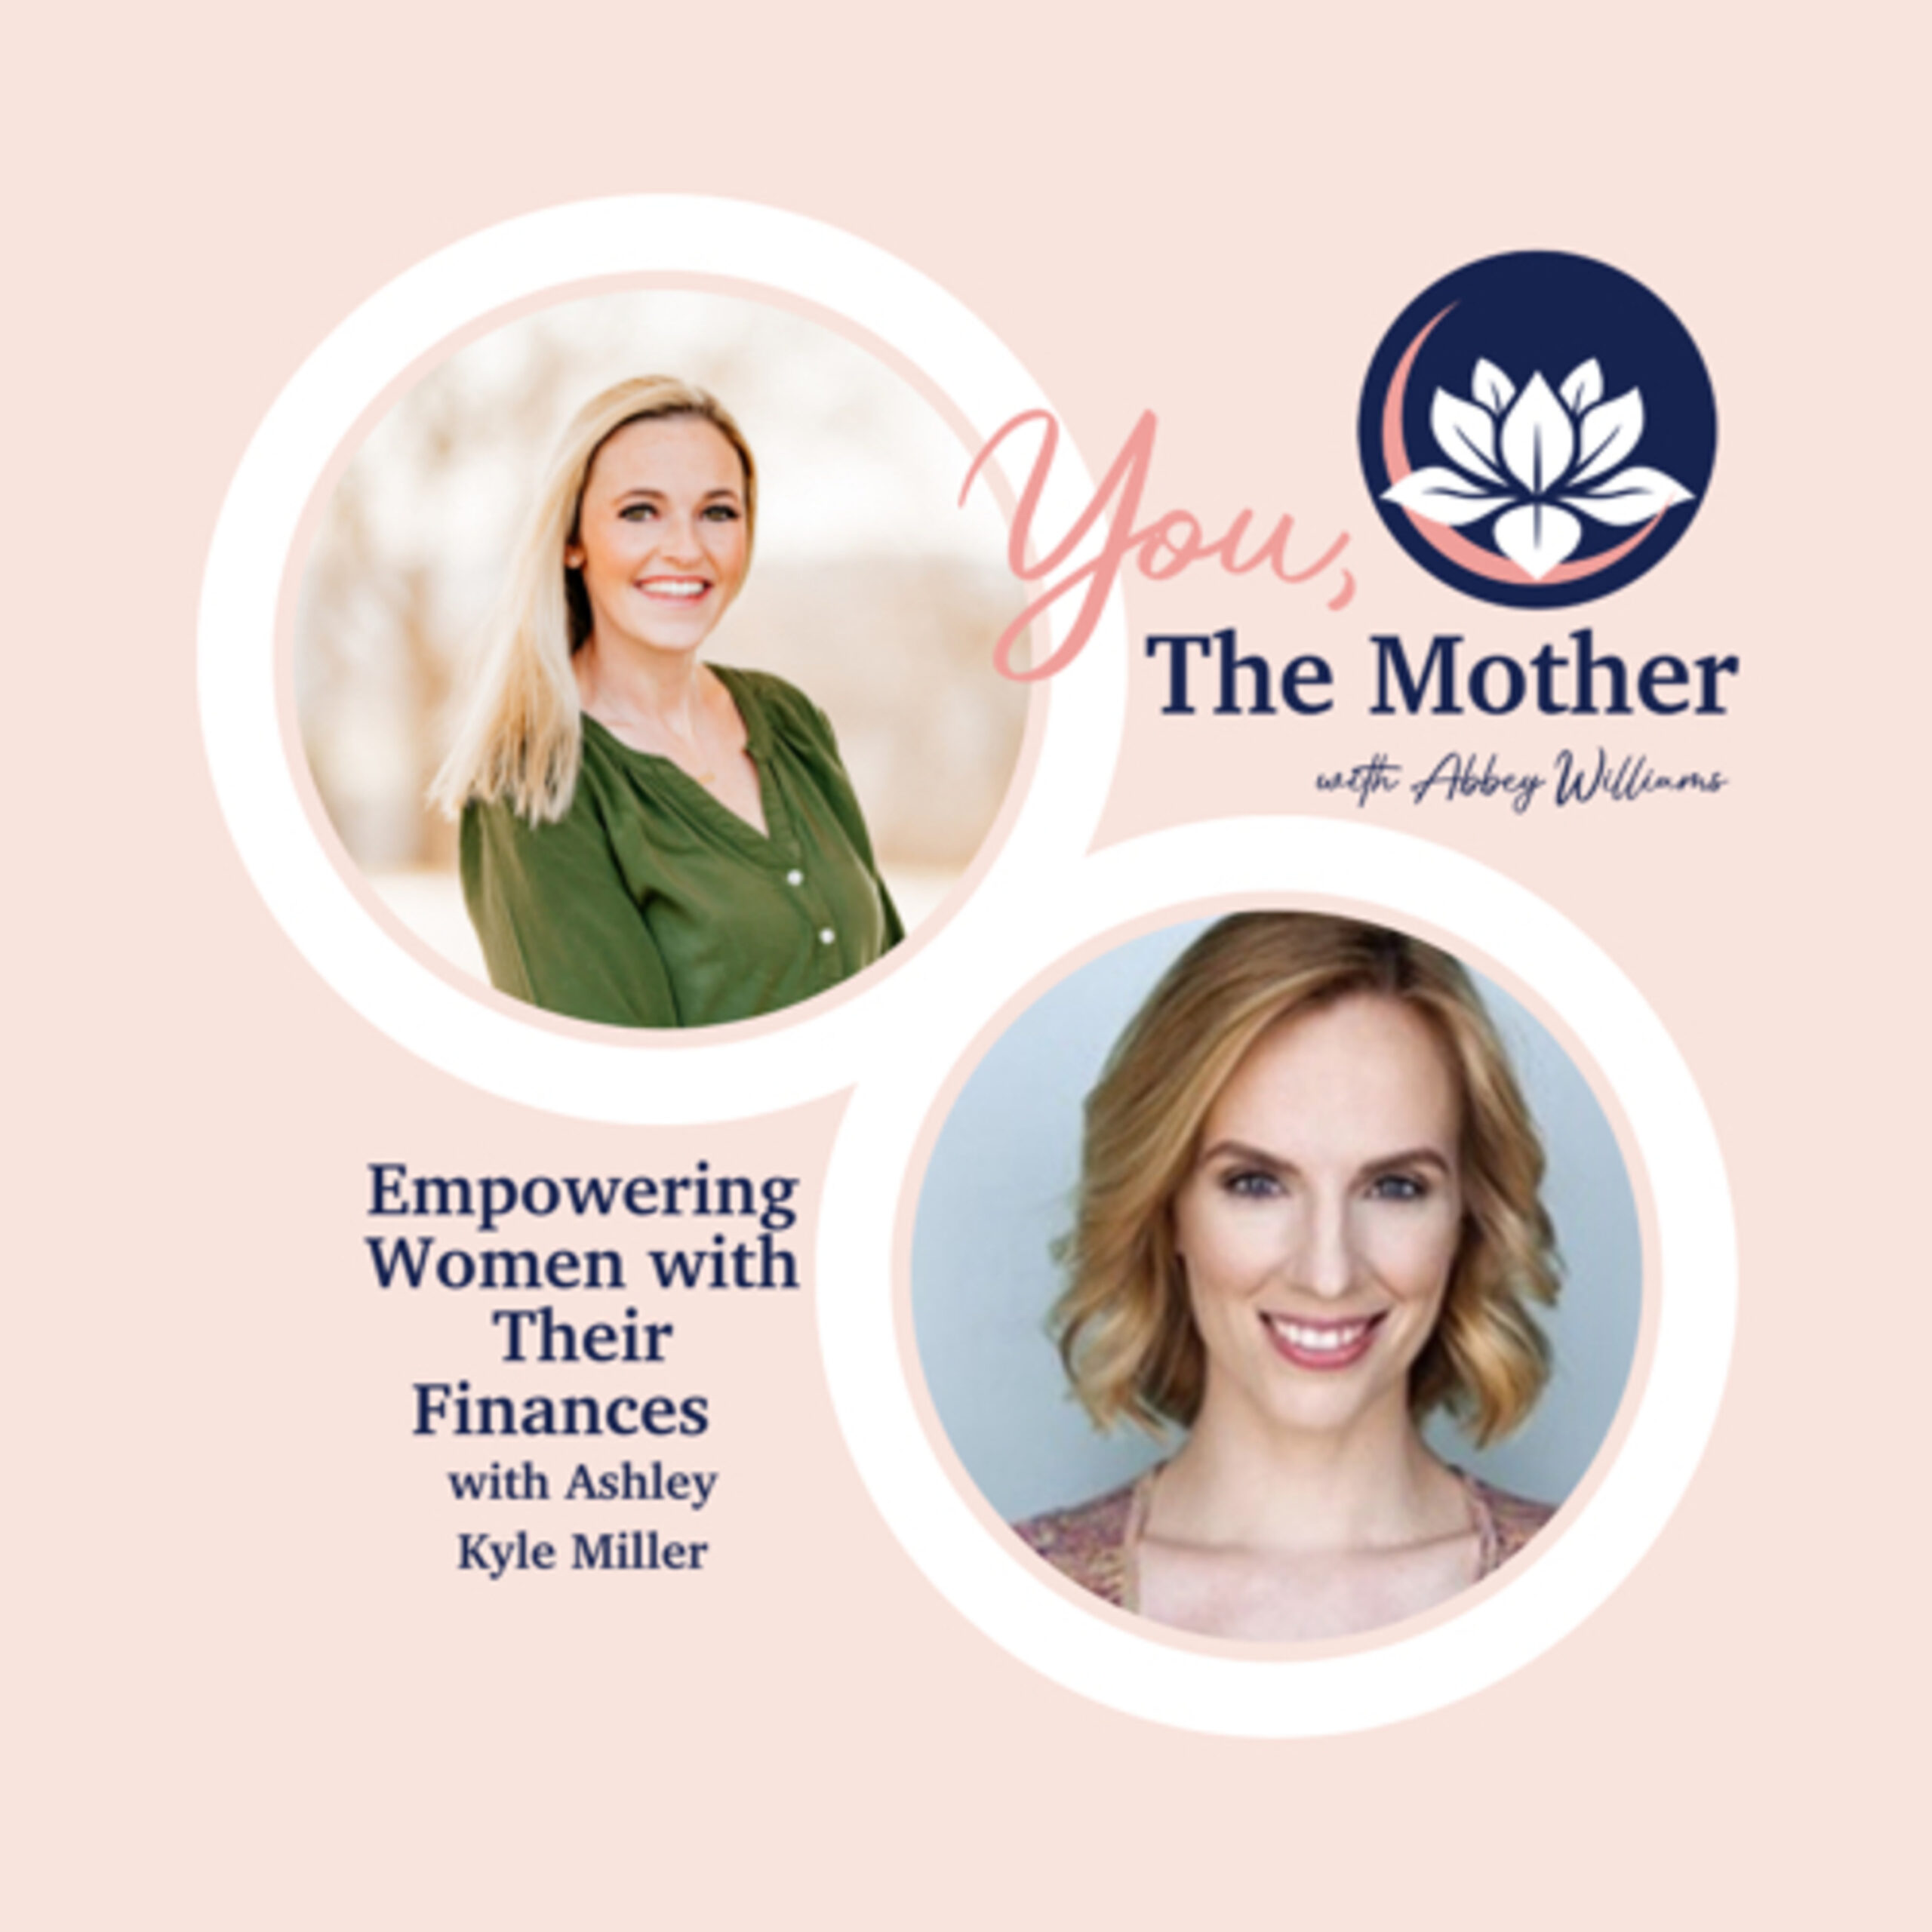 Empowering Women with Their Finances with Ashley Kyle Miller